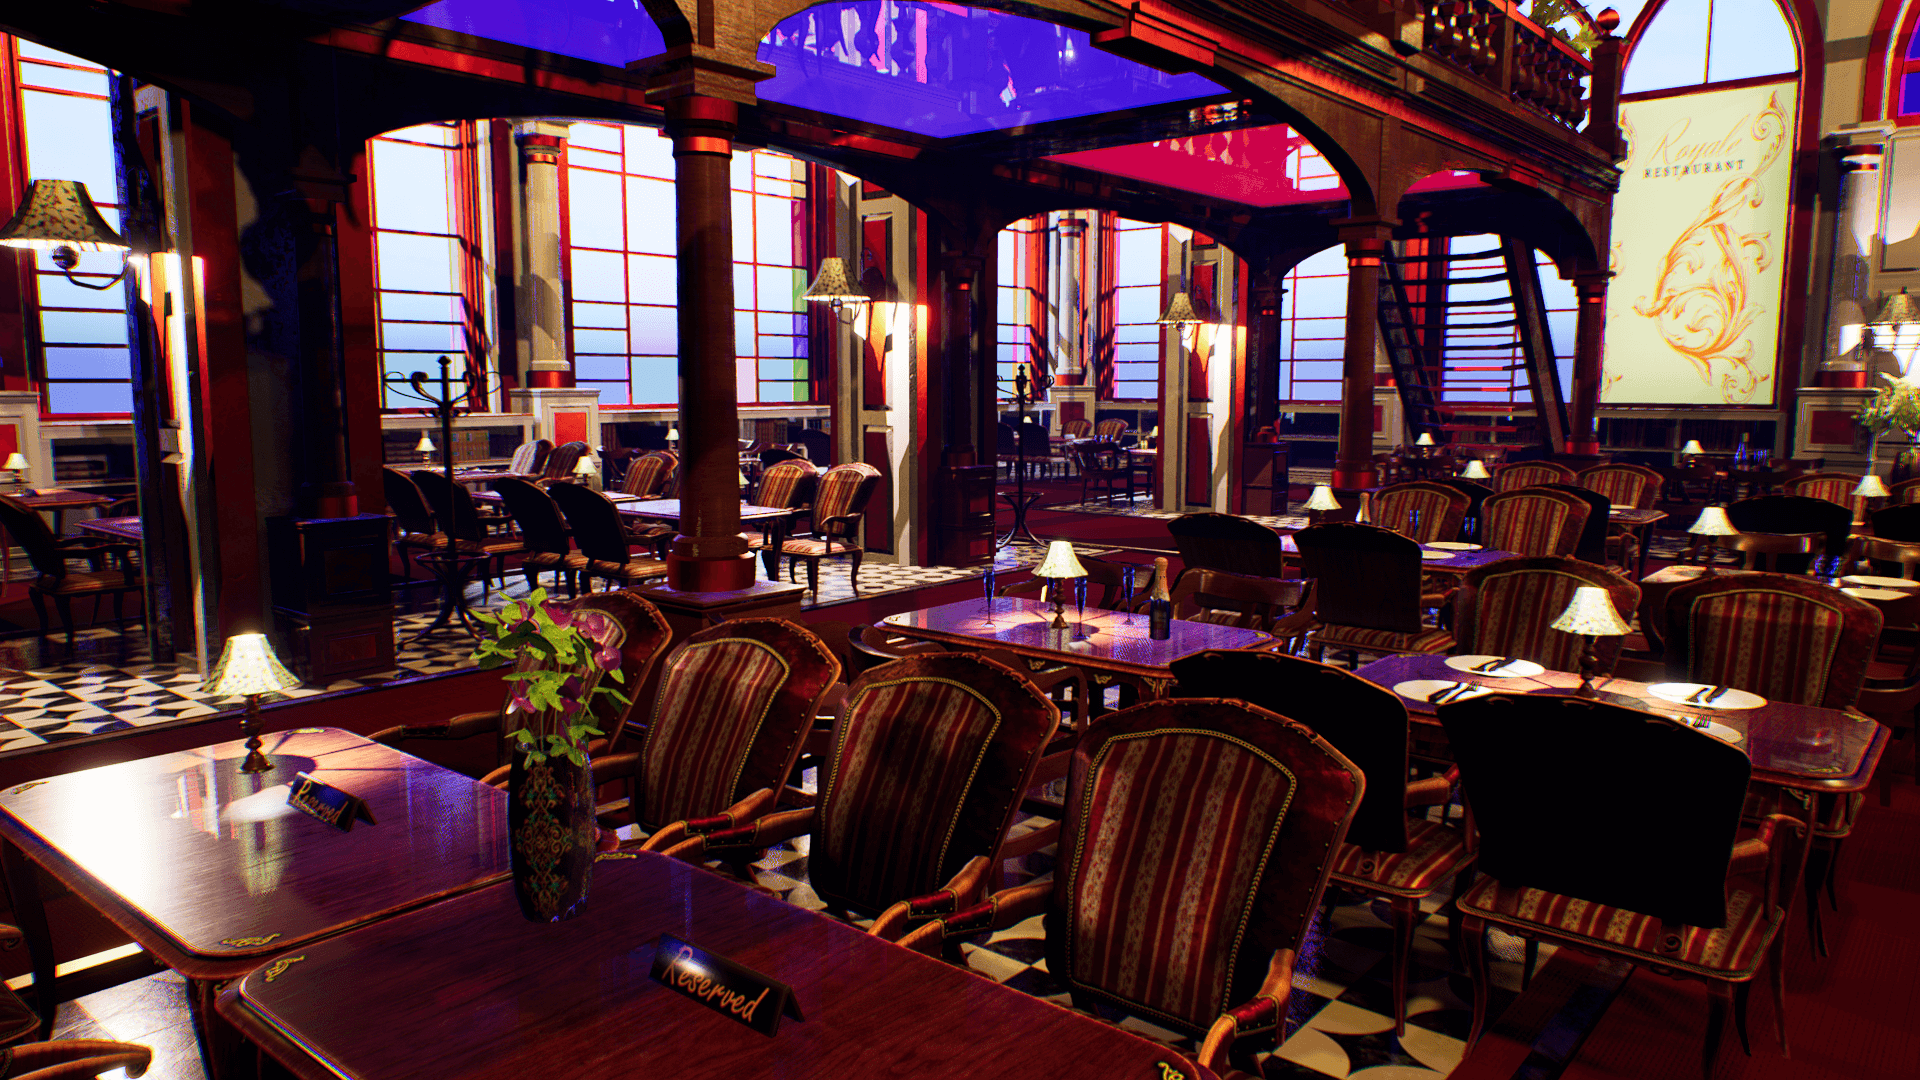 An image showing Restaurant Royale asset pack, created with Unreal Engine.